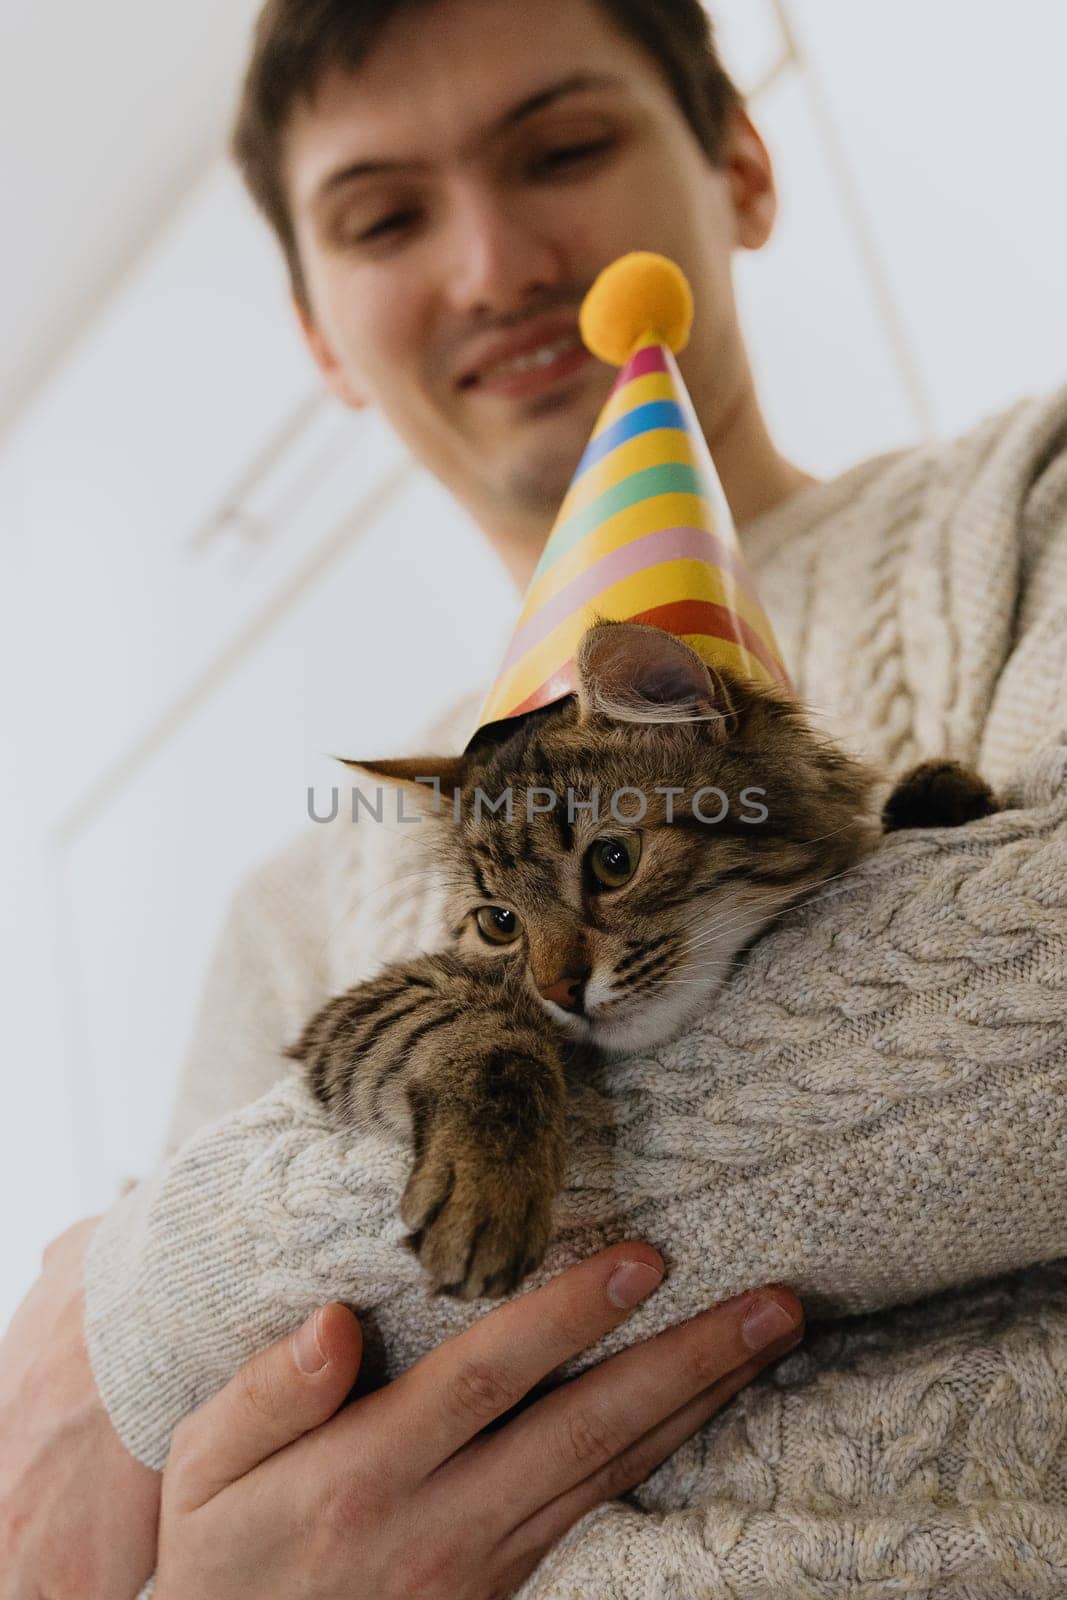 One handsome Caucasian happy guy holding a small tricolor kitten with a cone hat on his head, standing in the kitchen and celebrating a birthday, close-up view from below.